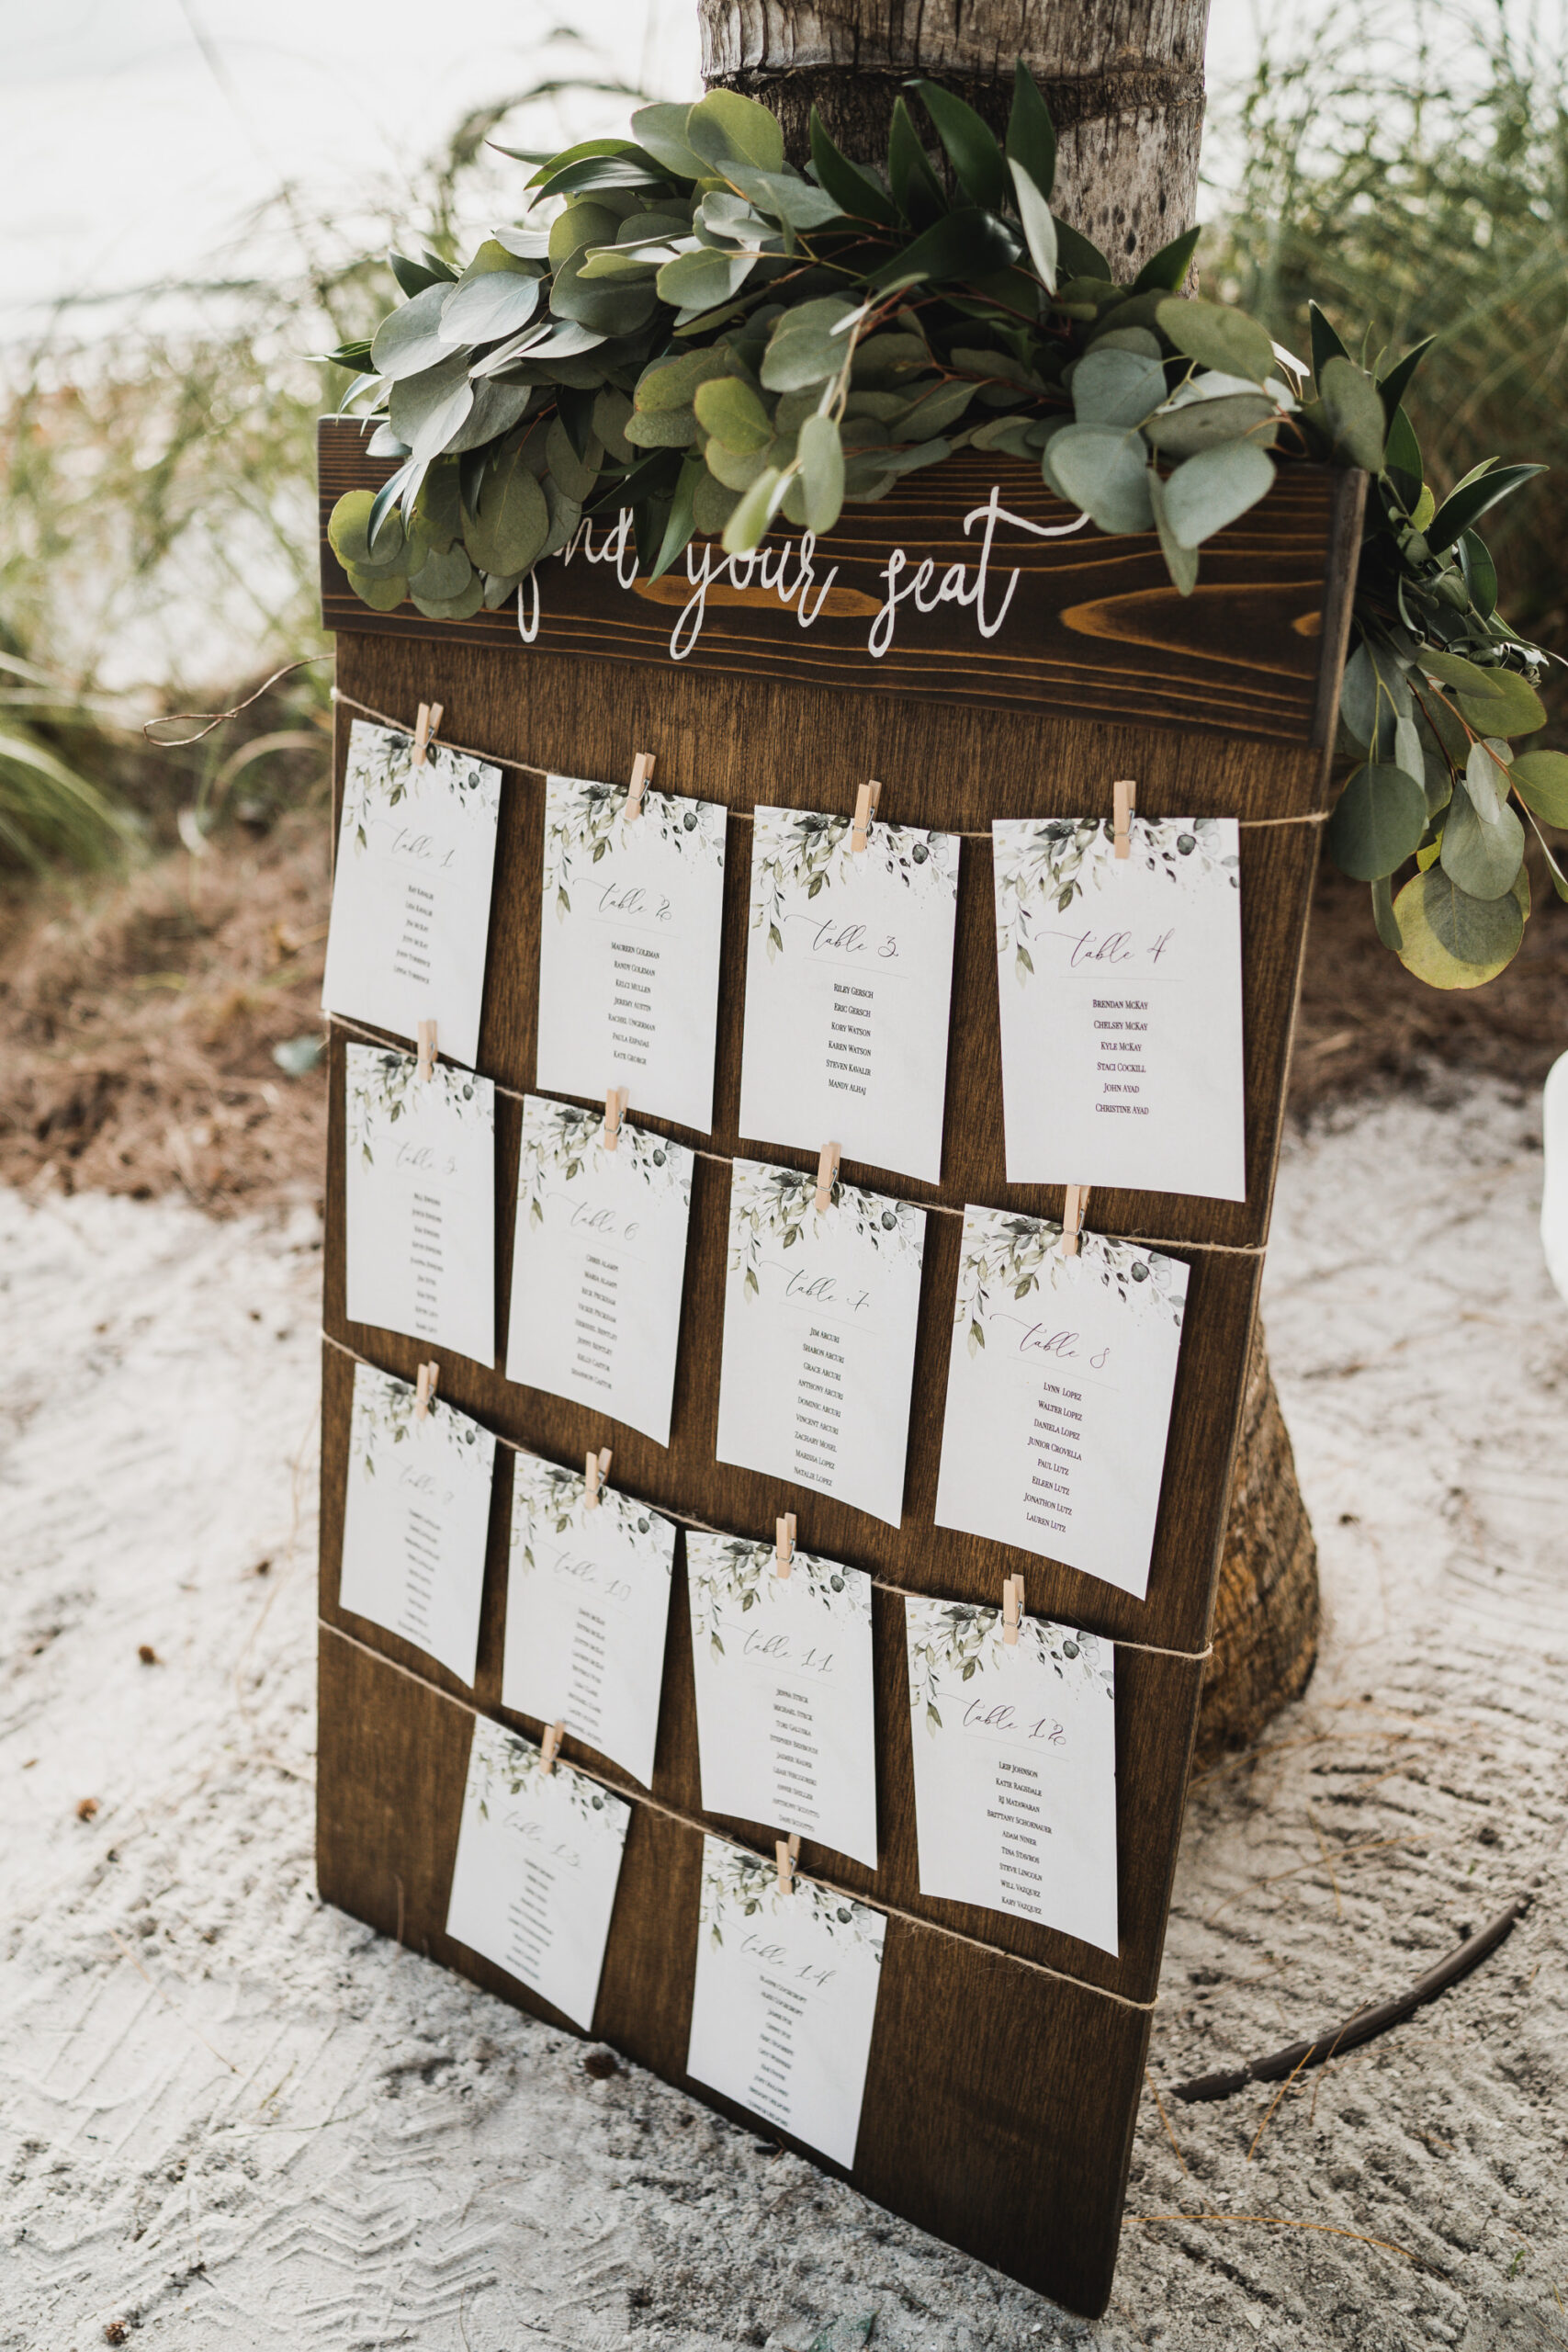 Wooden Clothespin and Hanging Find Your Seat Reception Seating Chart | Rustic Wedding Inspiration